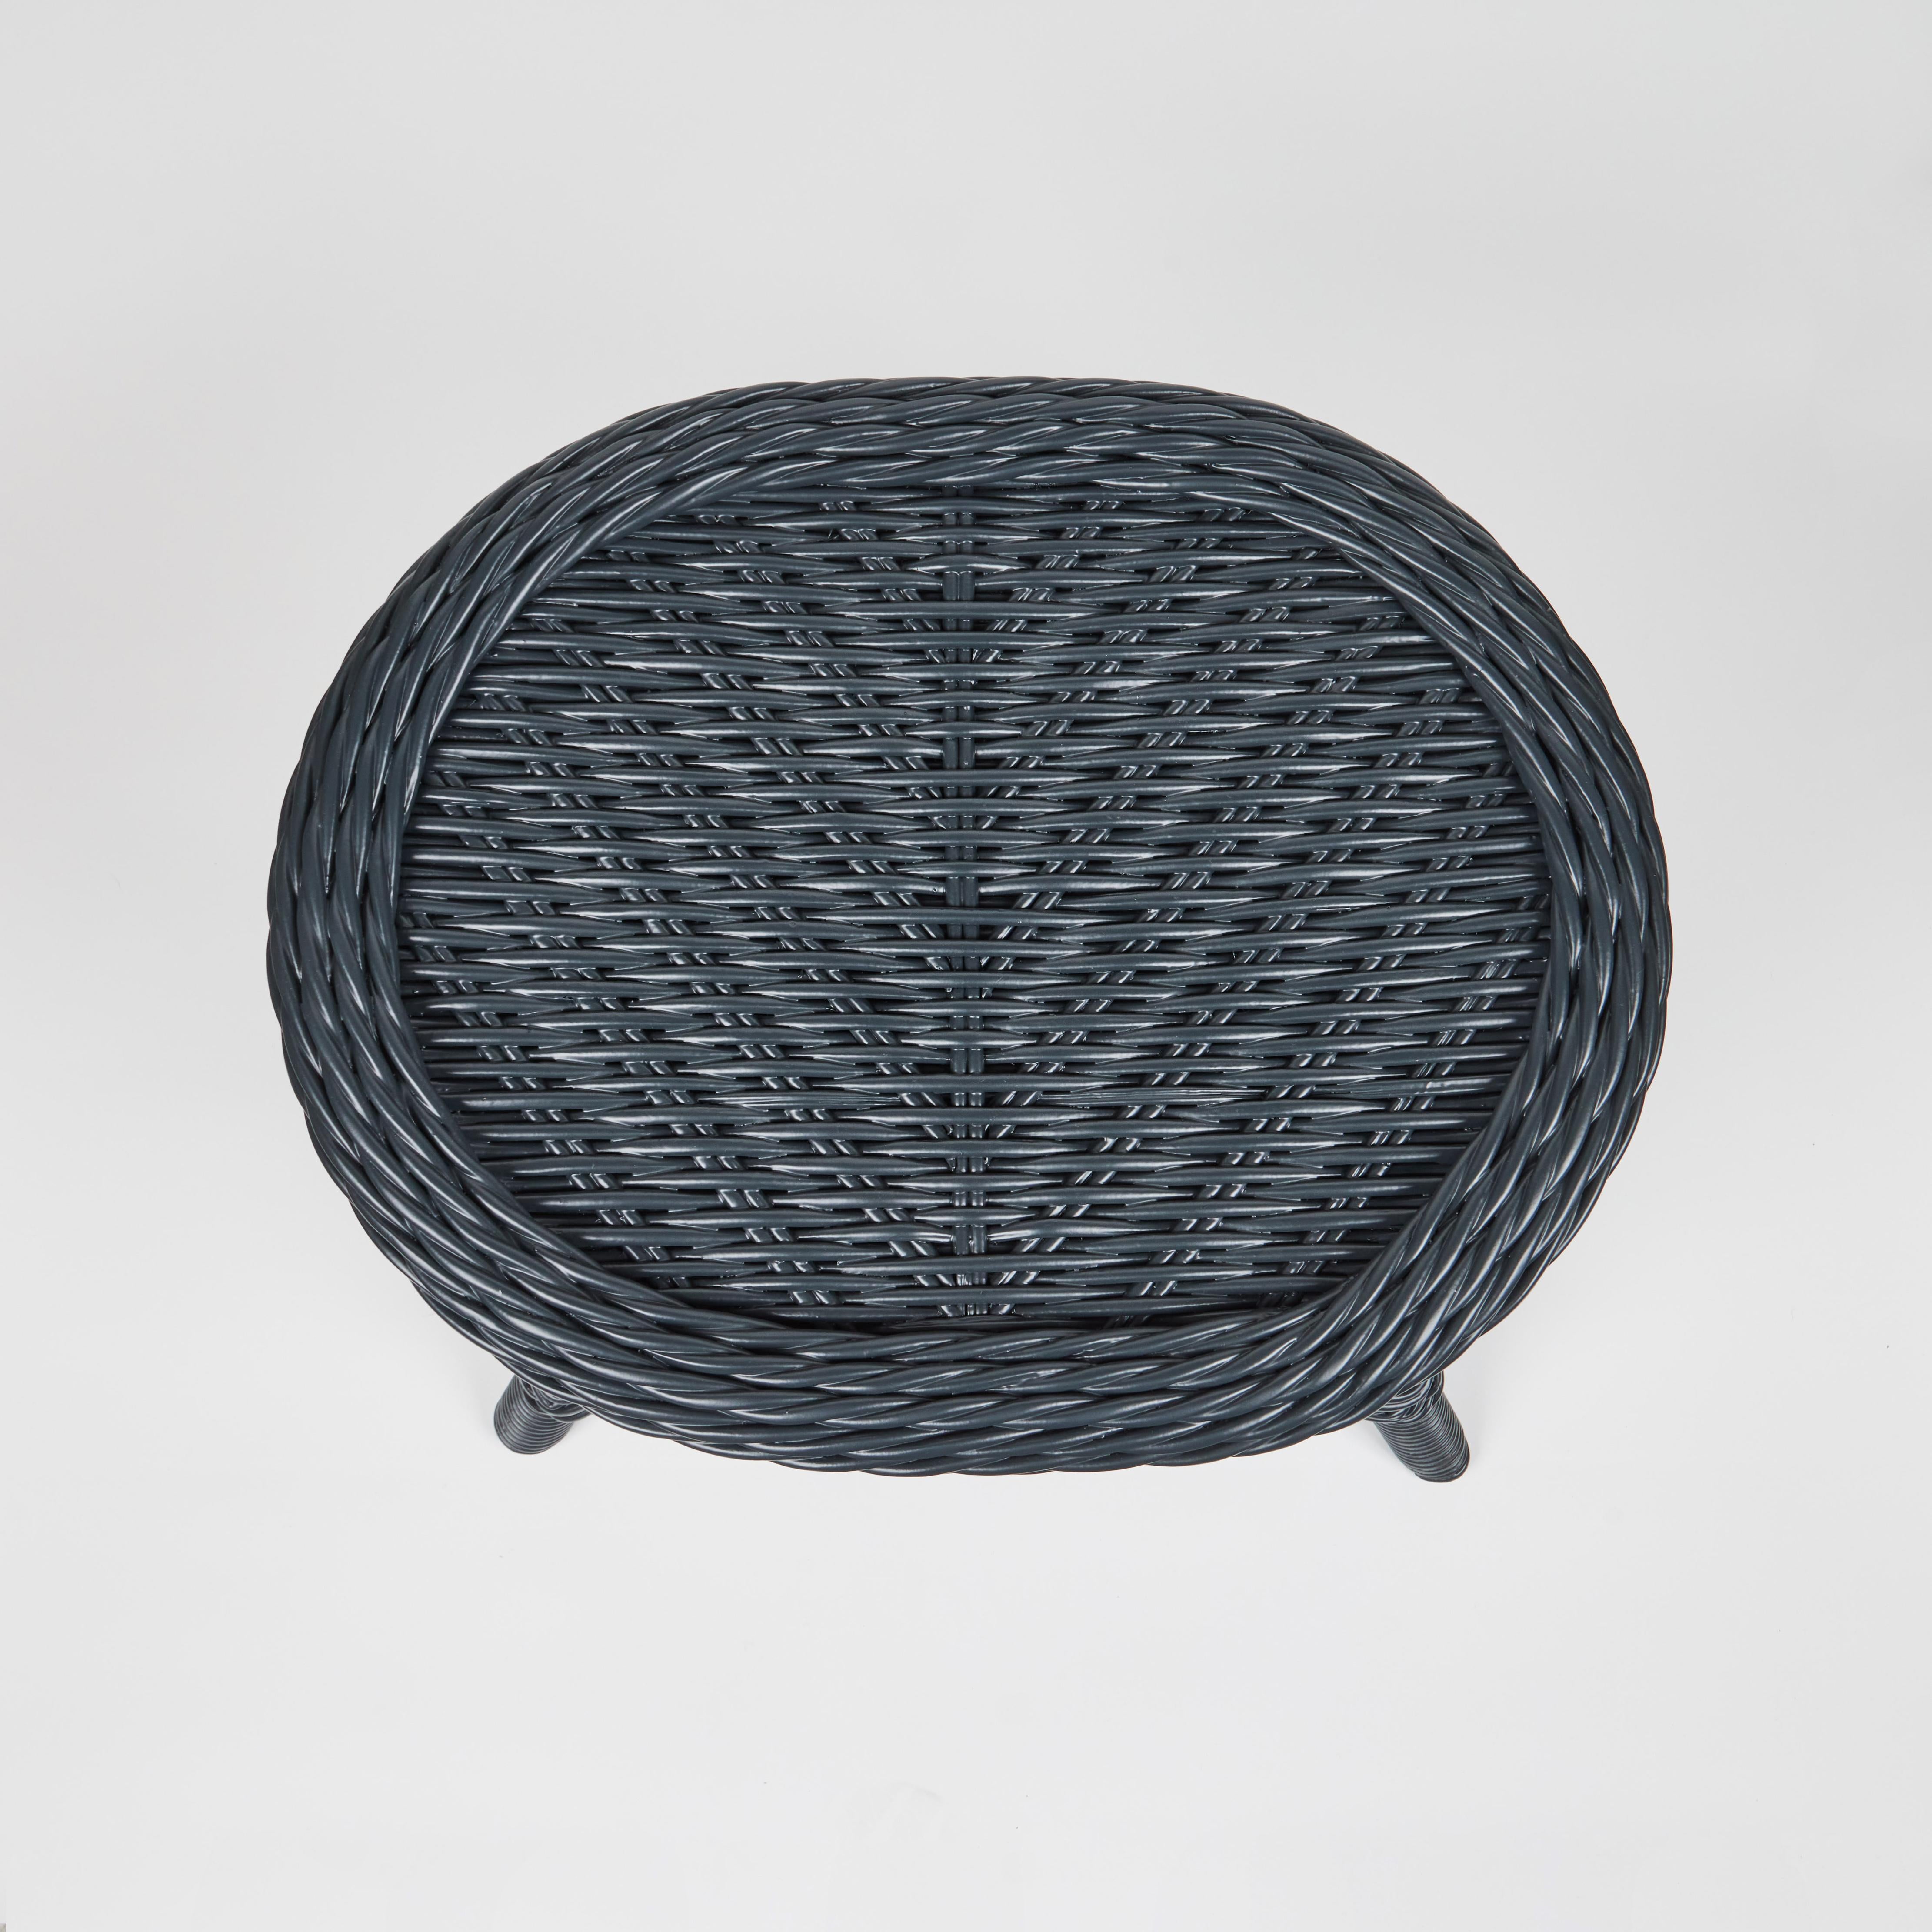 ​L​ooking for a small table with charm and interest? This vintage wicker table ​has been newly painted in a soothing blue/grey finish and is ready for cocktails, tea or afternoon reads. It offers a lovely pop of color or fades quietly next to your